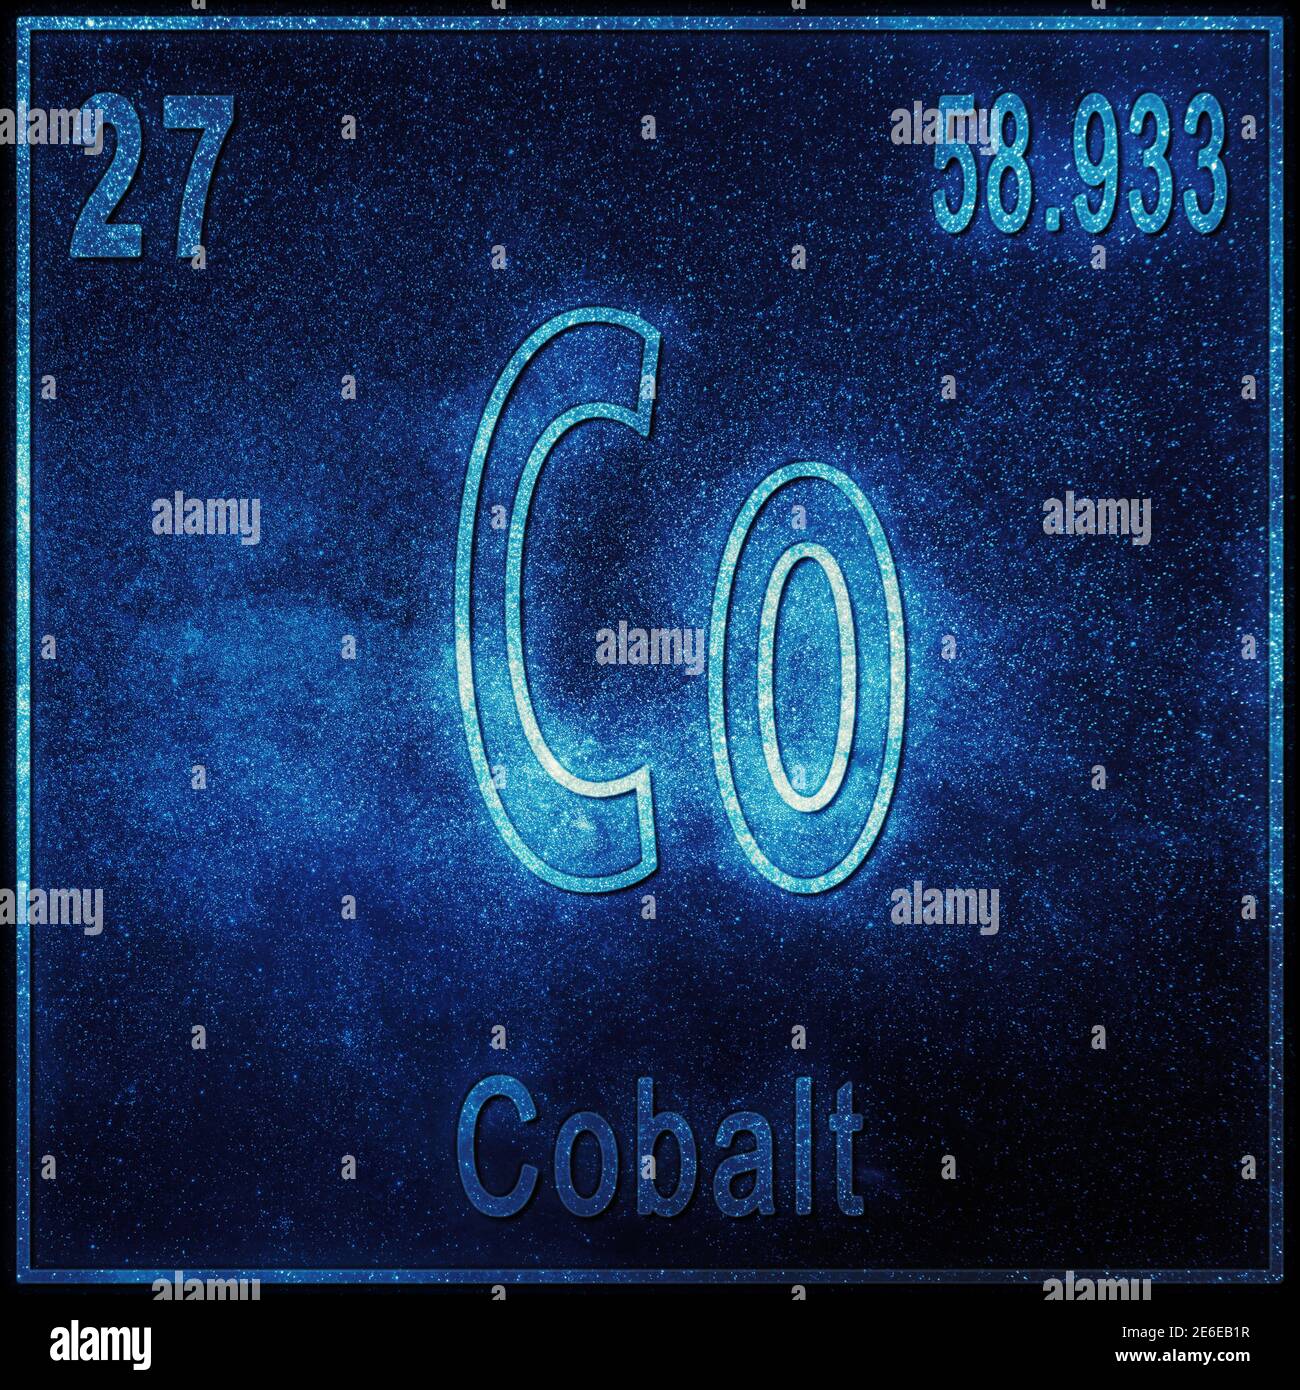 Cobalt chemical element, Sign with atomic number and atomic weight, Periodic Table Element Stock Photo